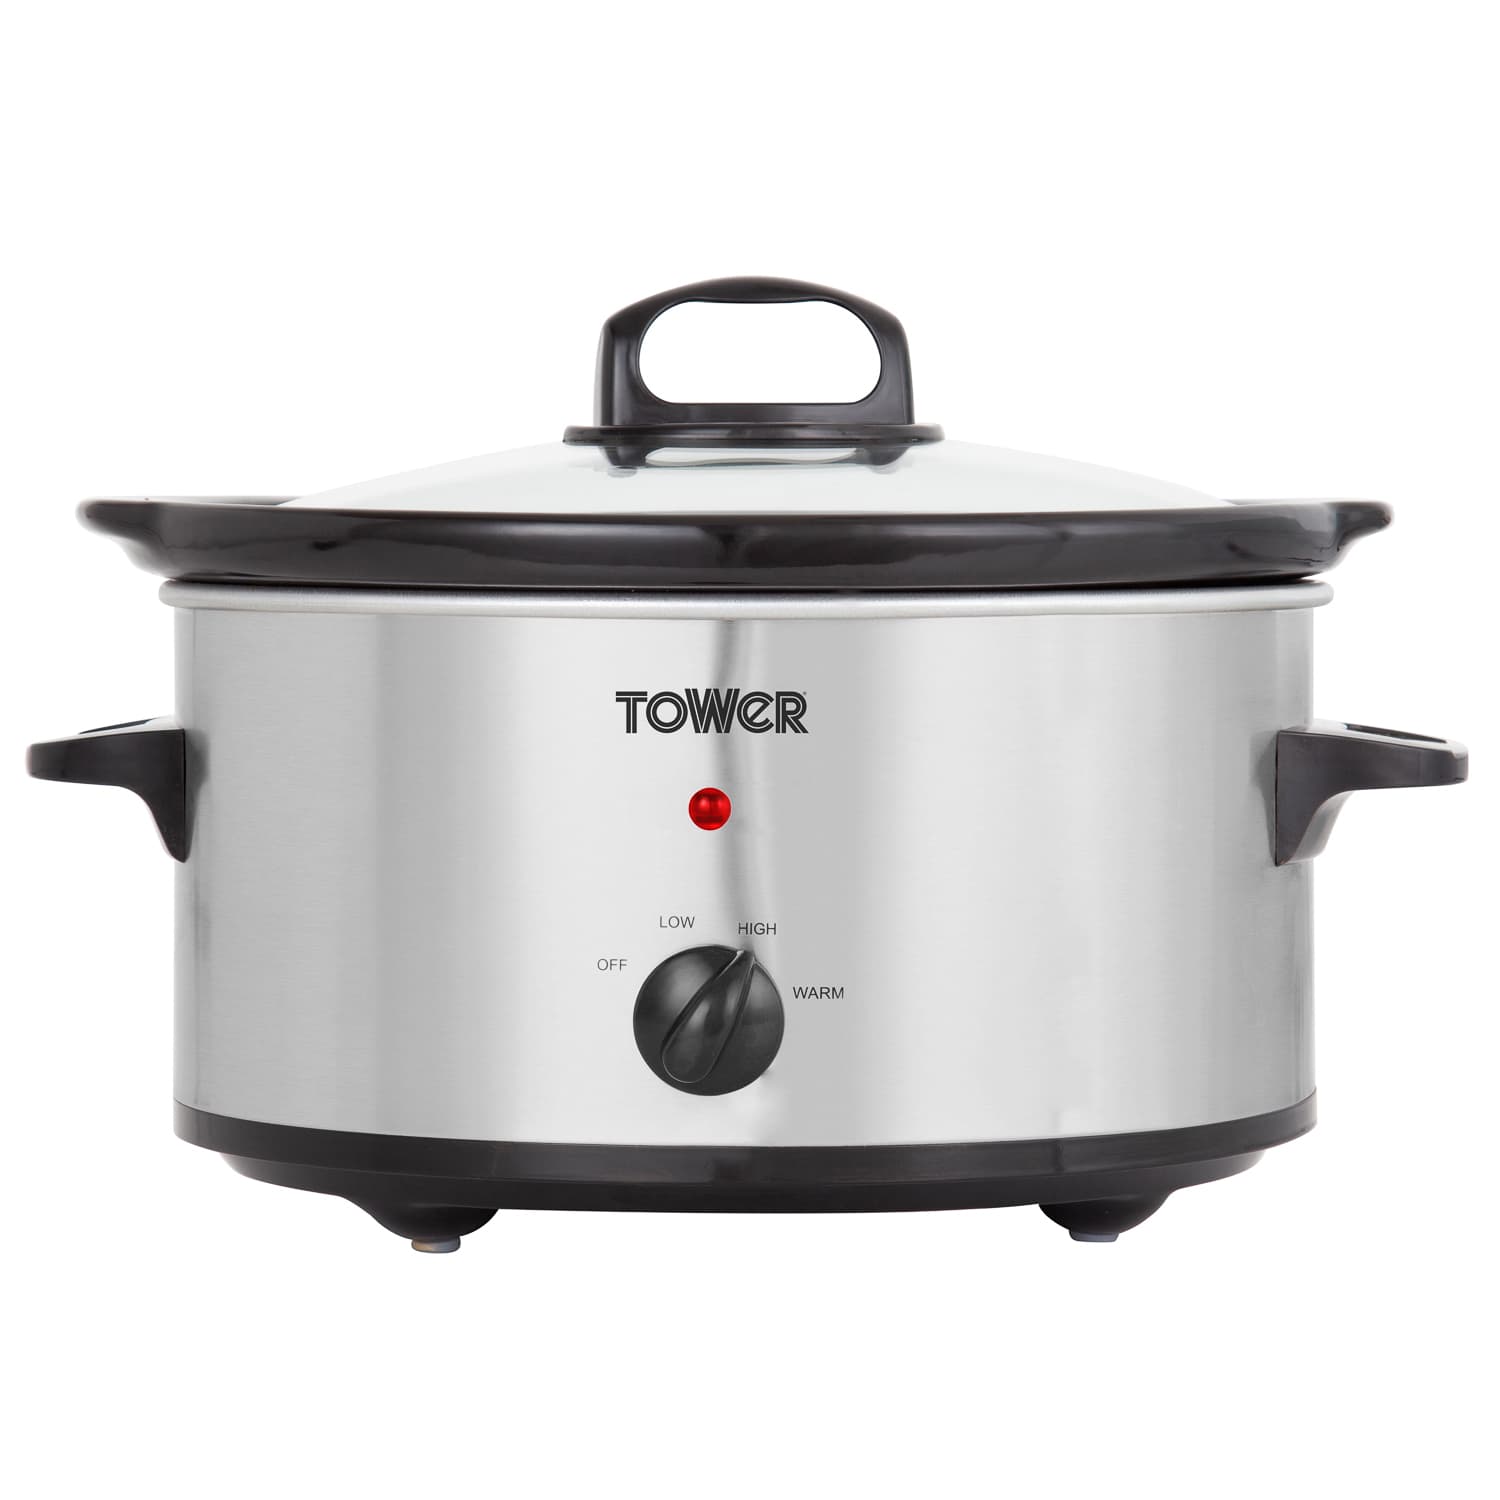 Tower 6.5L Slow Cooker - Stainless Steel, Home